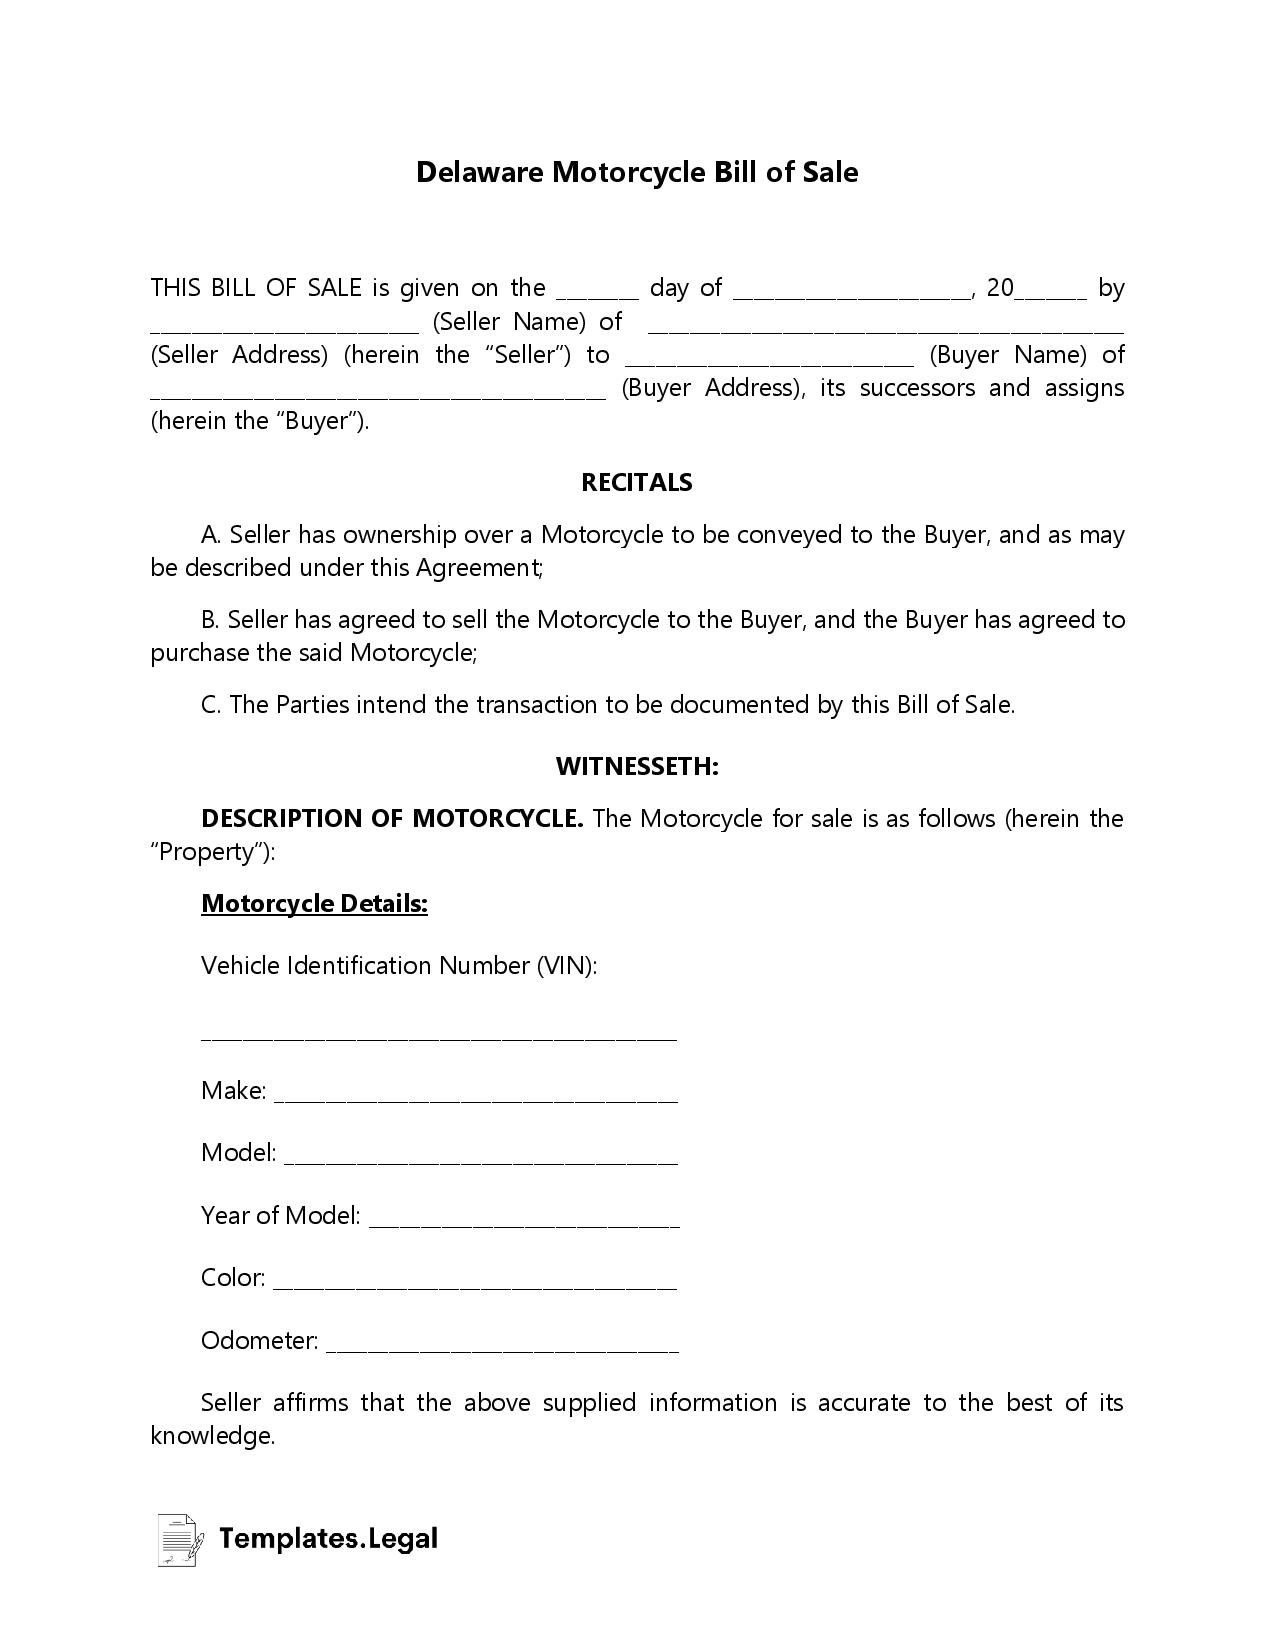 Delaware Motorcycle Bill of Sale - Templates.Legal